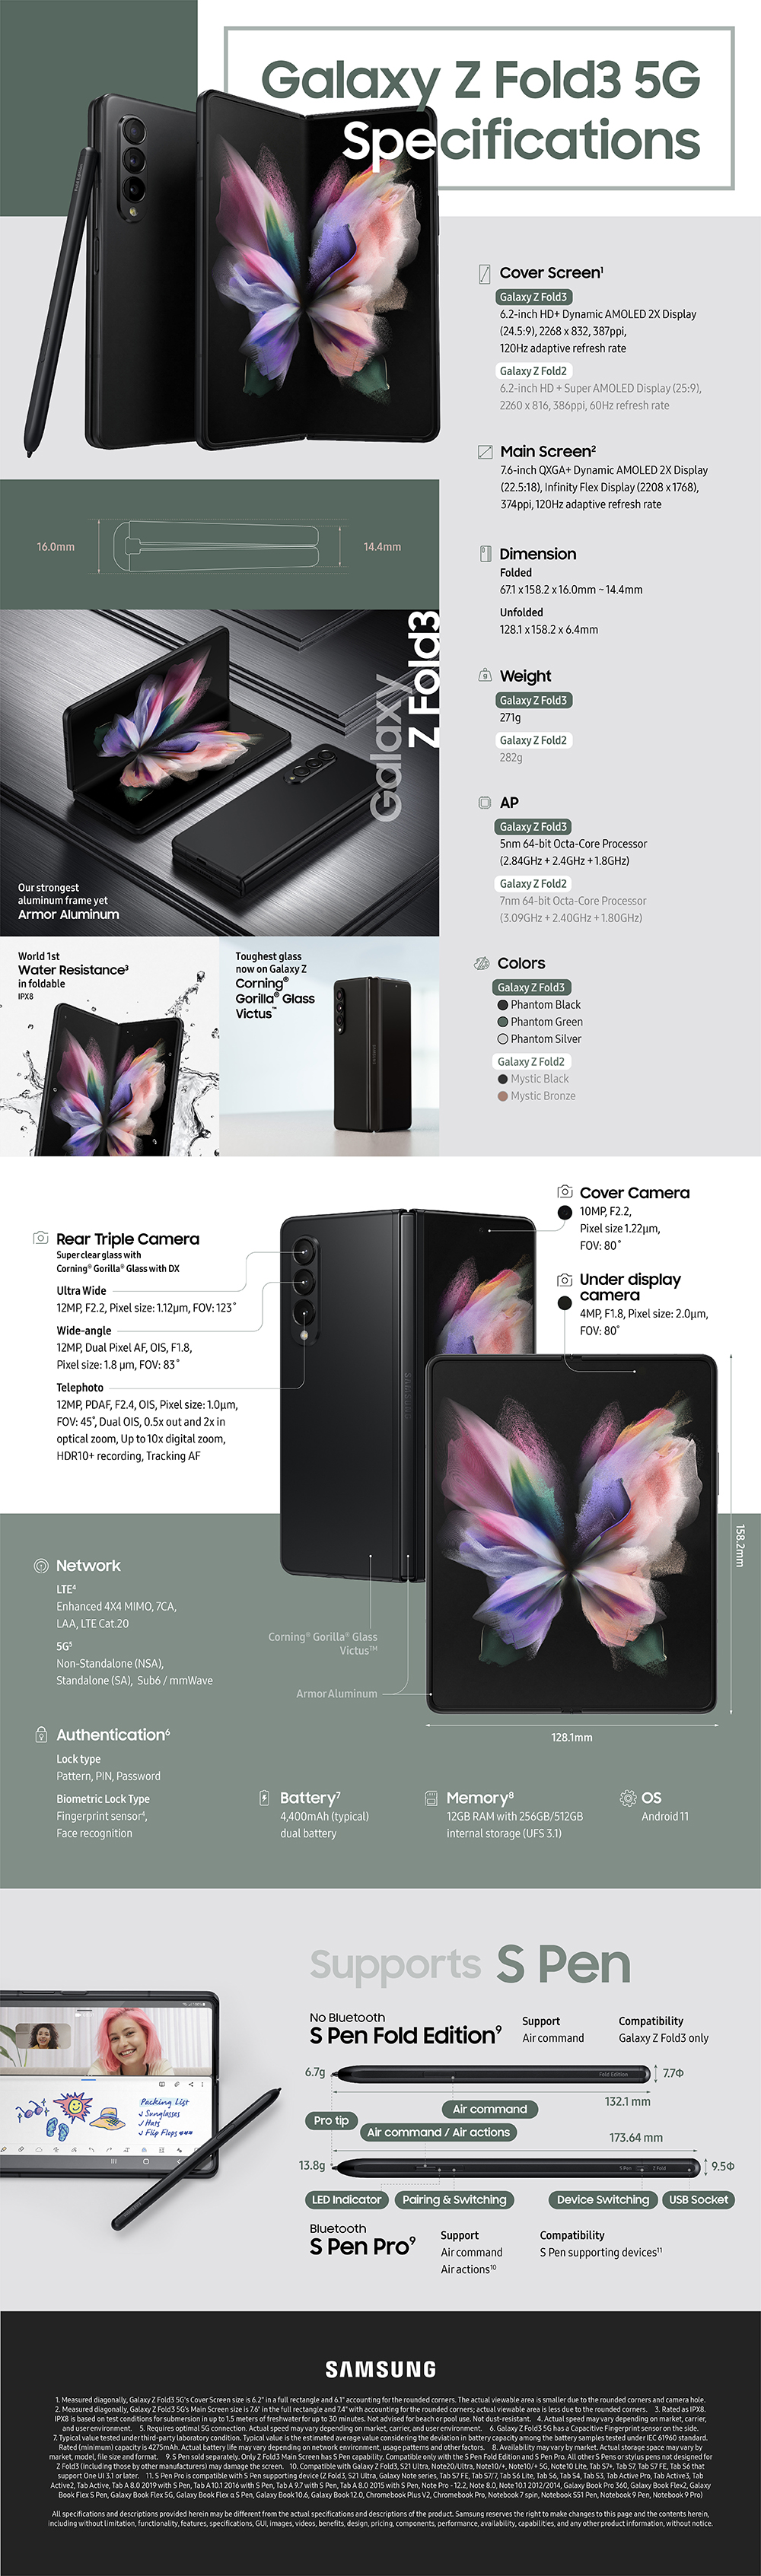 Galaxy Z Fold3 5G Product Specifications